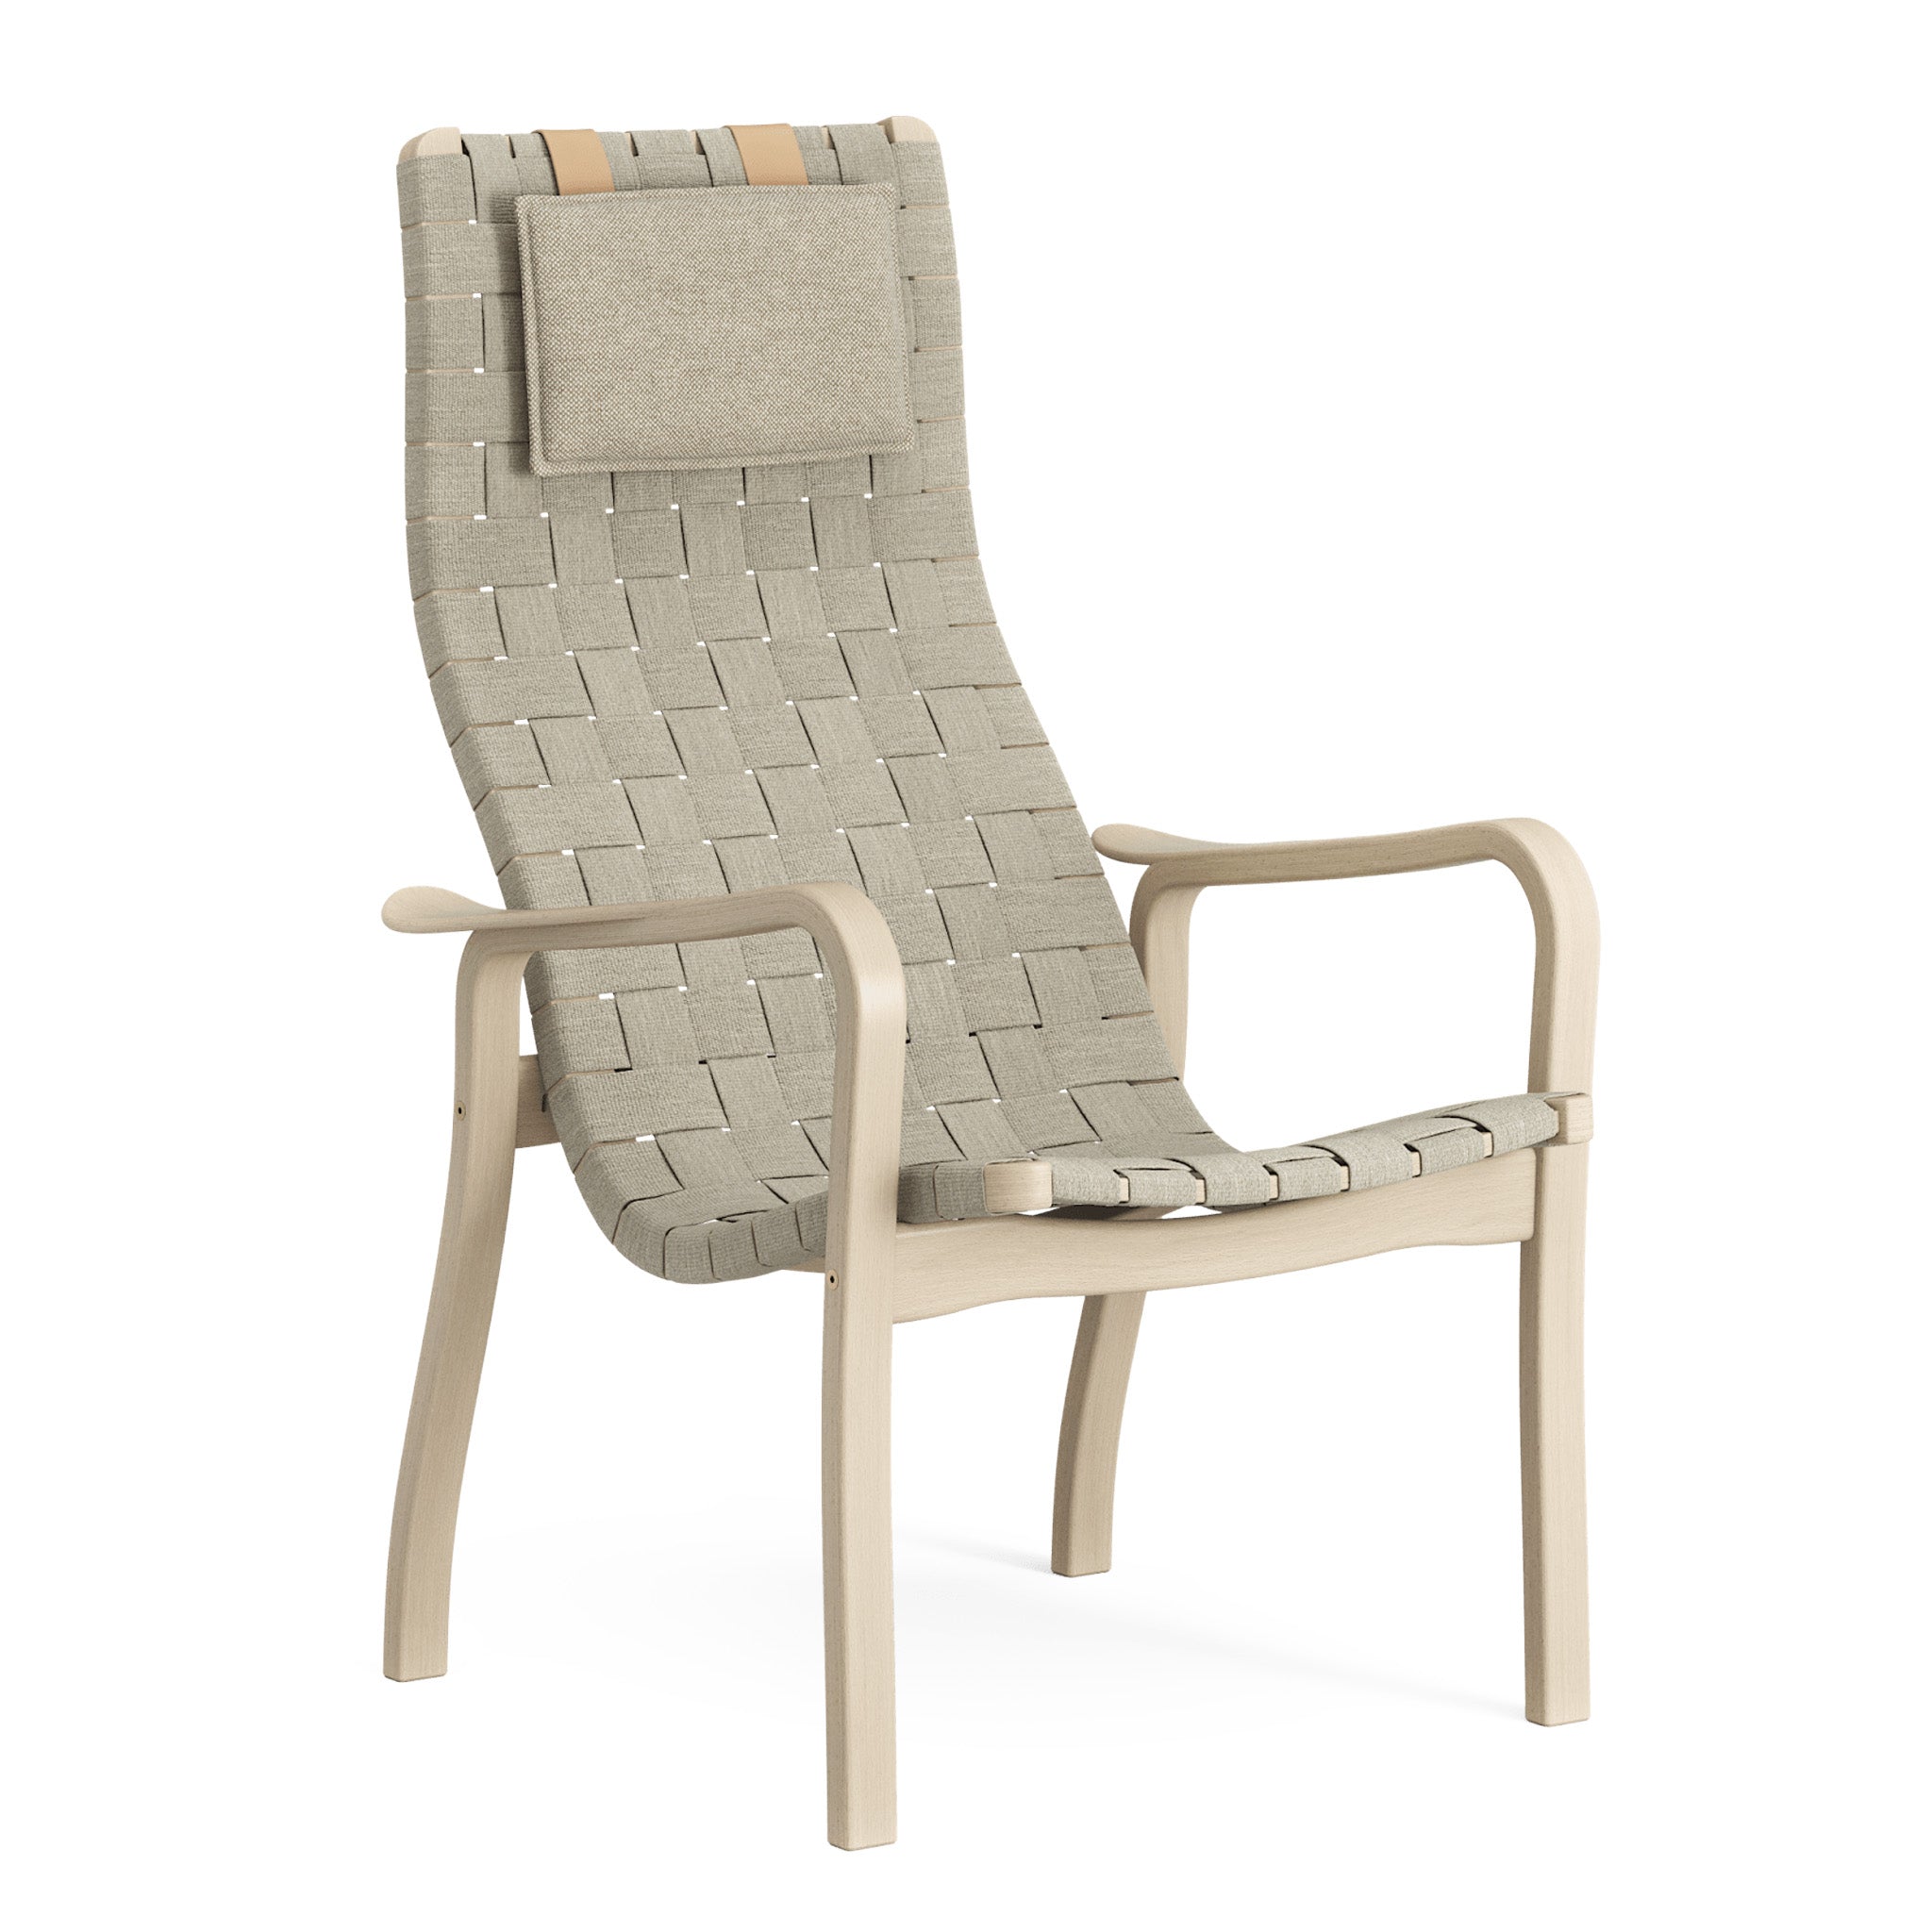 Primo Lounger by Swedese